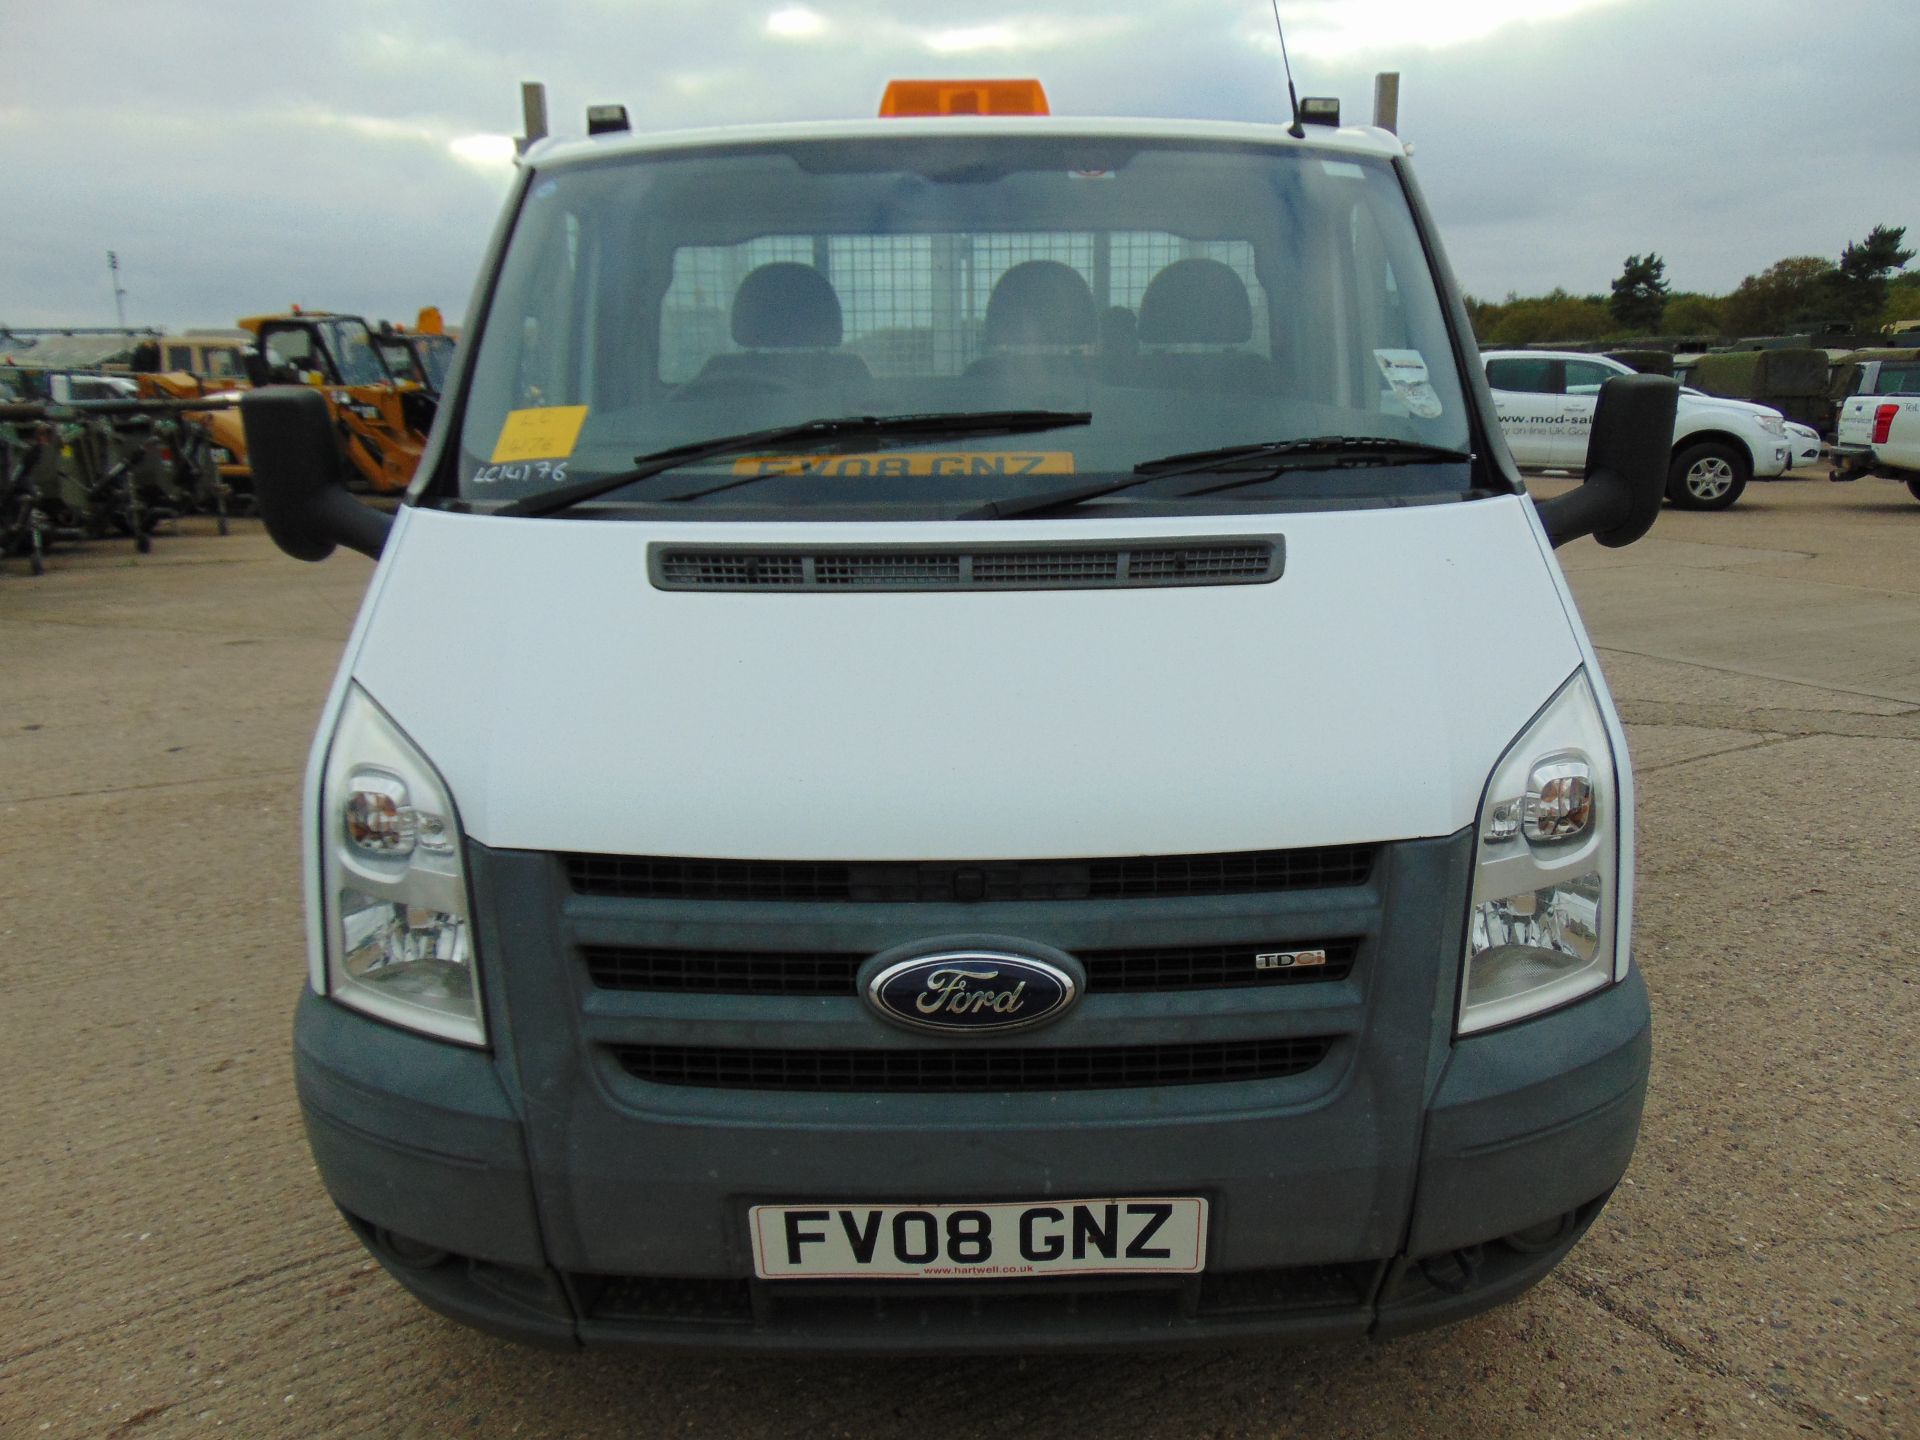 Ford Transit 115 T350 Flat Bed Tipper - Image 3 of 15